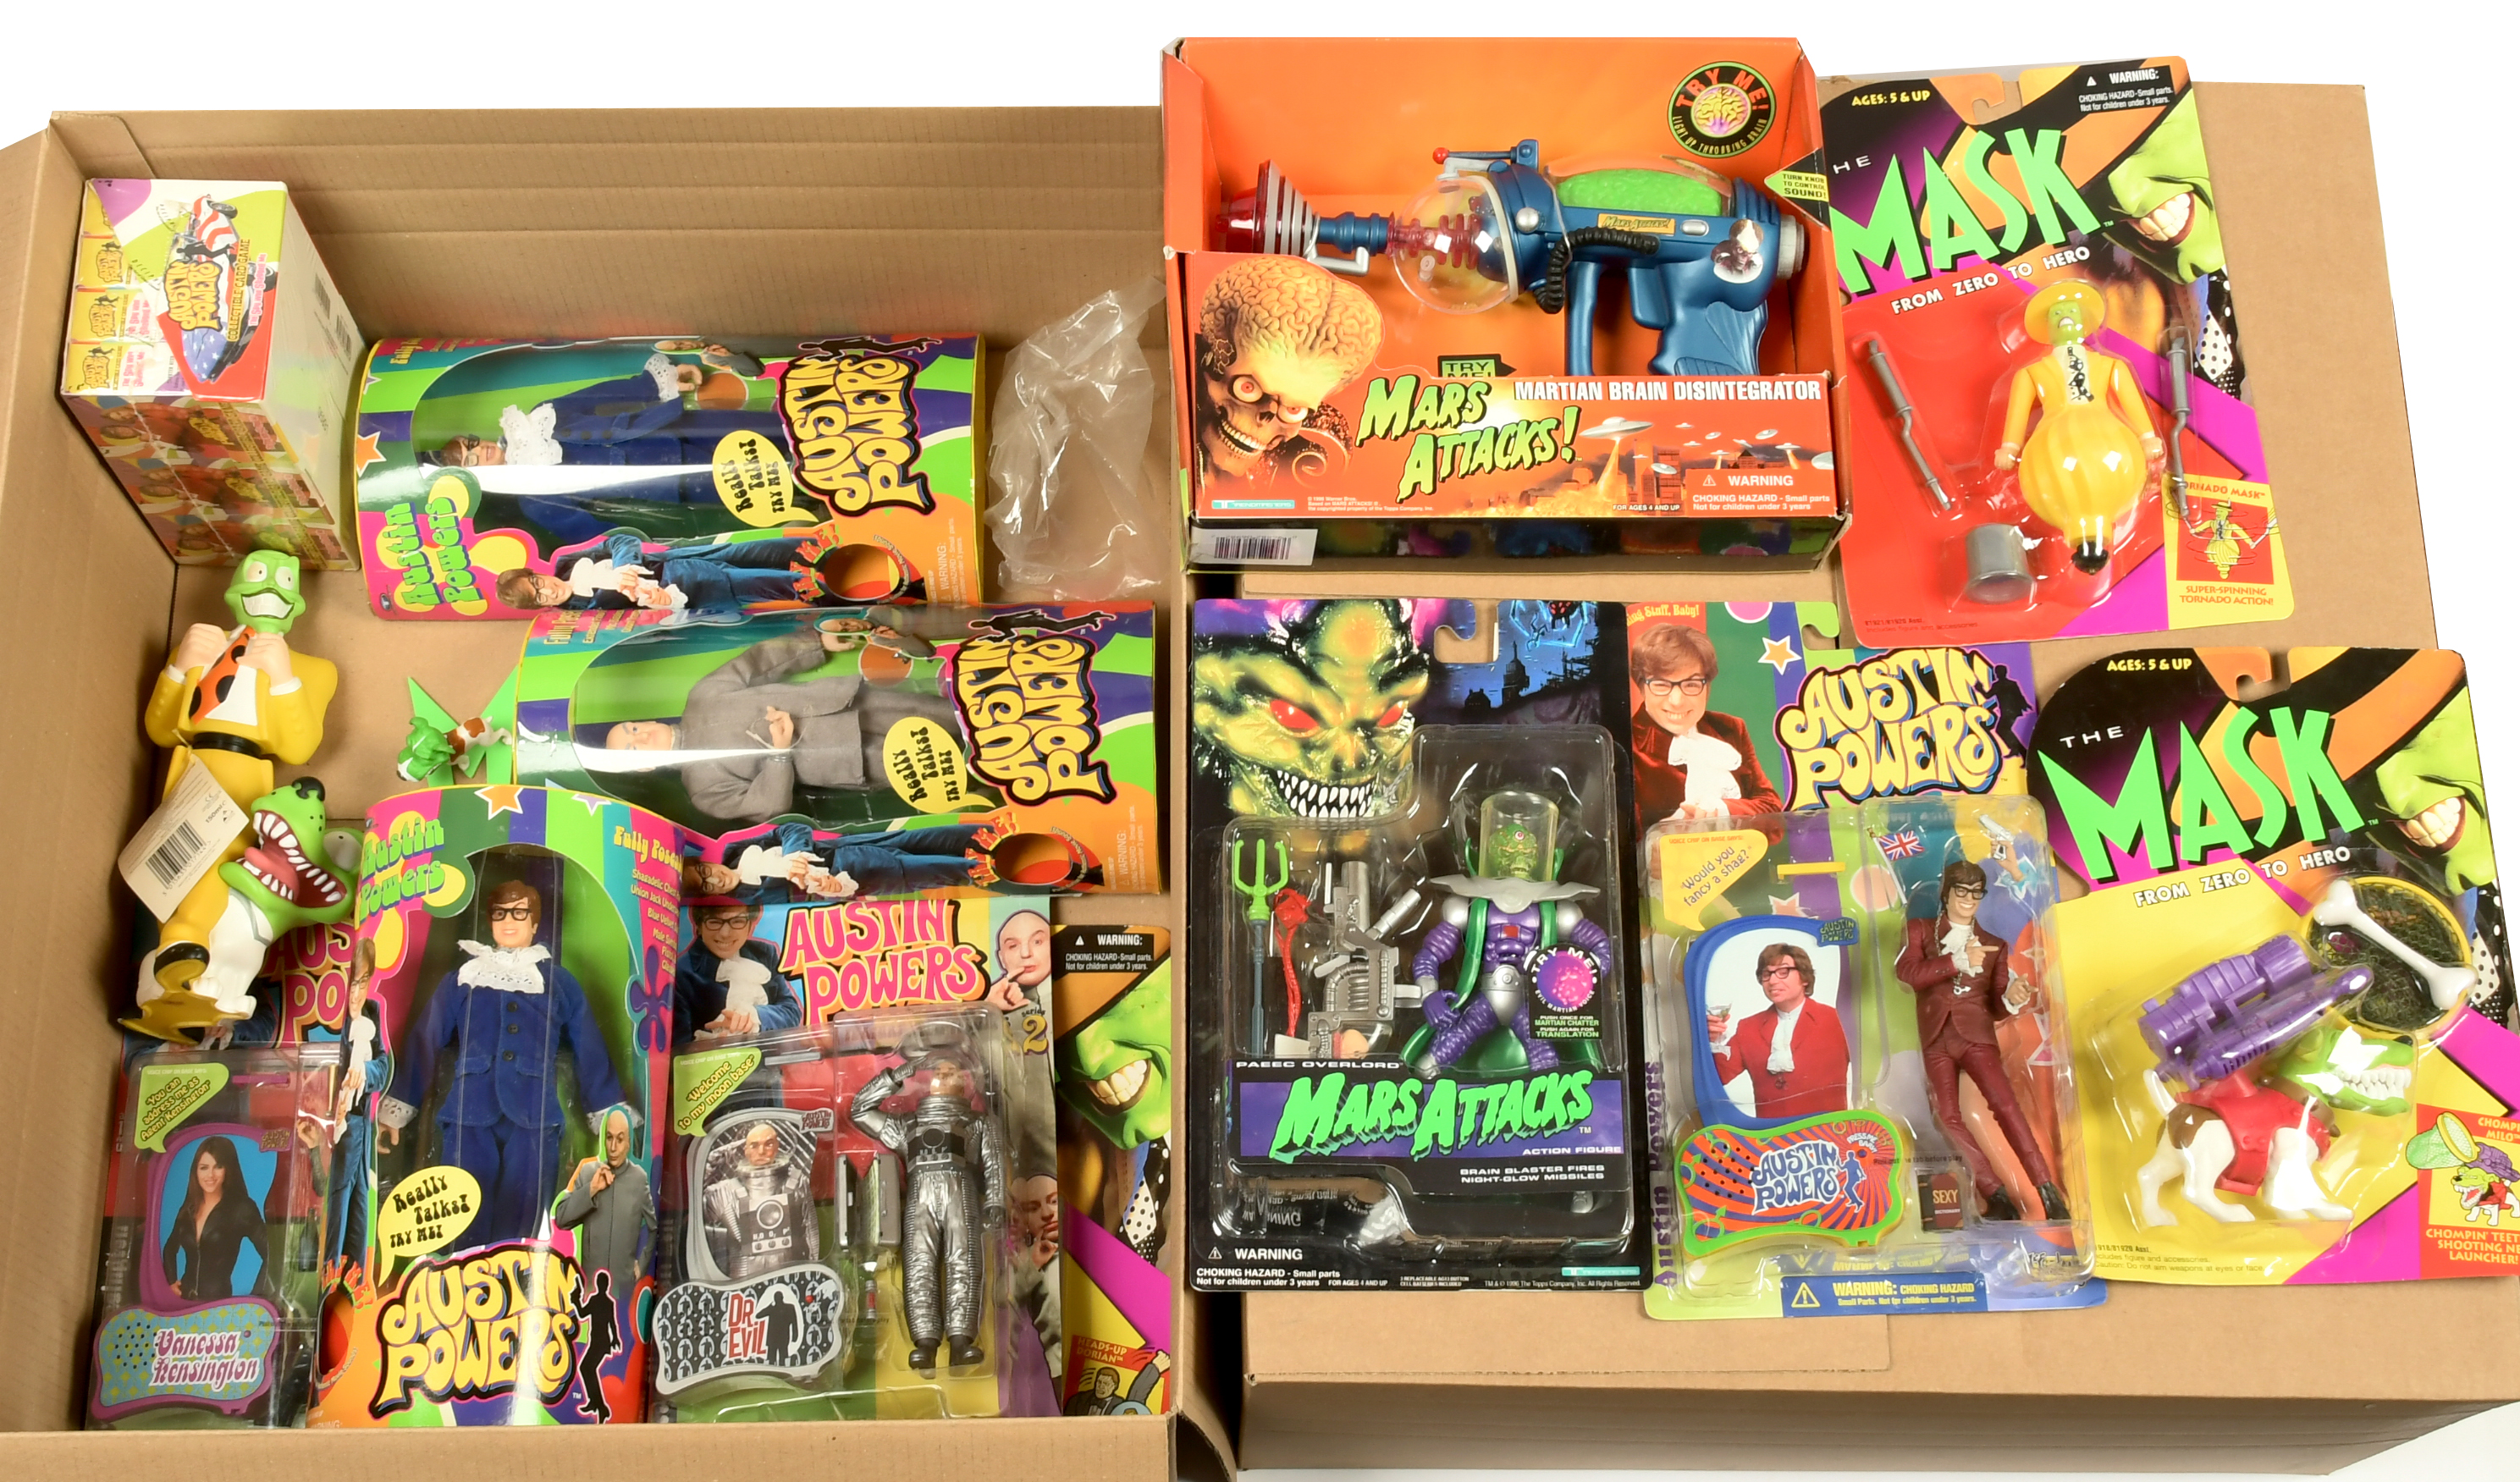 Mars Attacks, The Mask and Austin Powers collection of toys